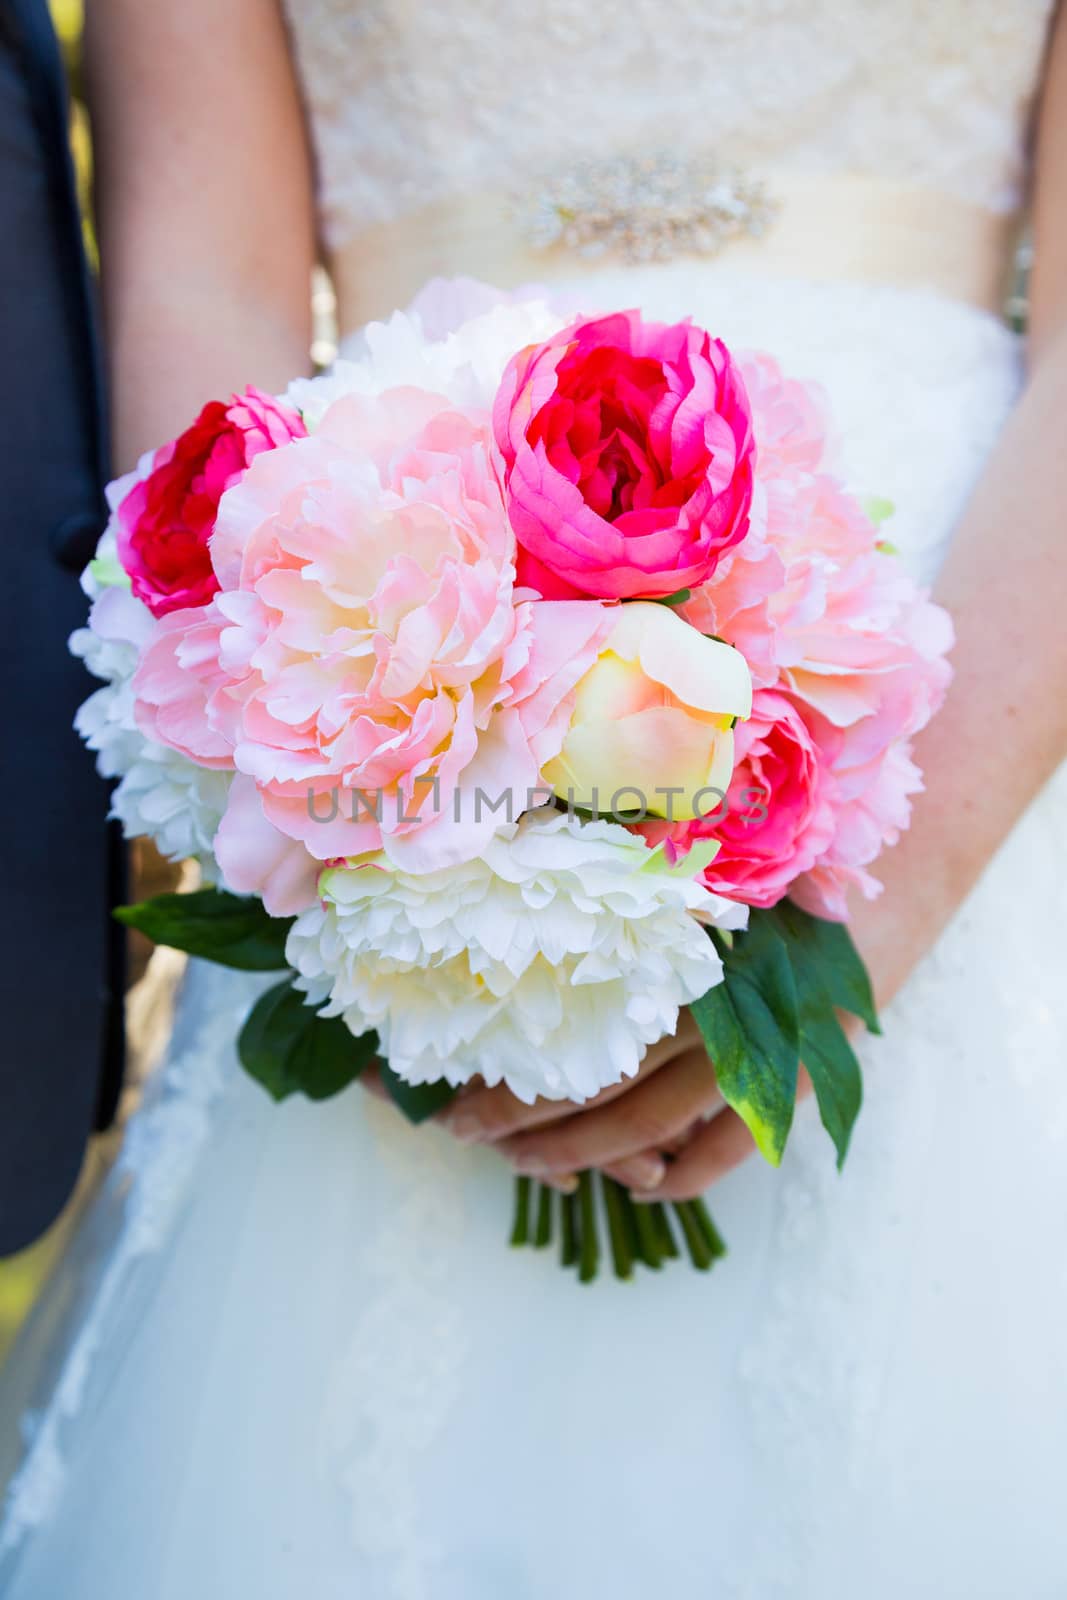 This bride holds her bouquet of white and pink flowers against her white wedding dress.